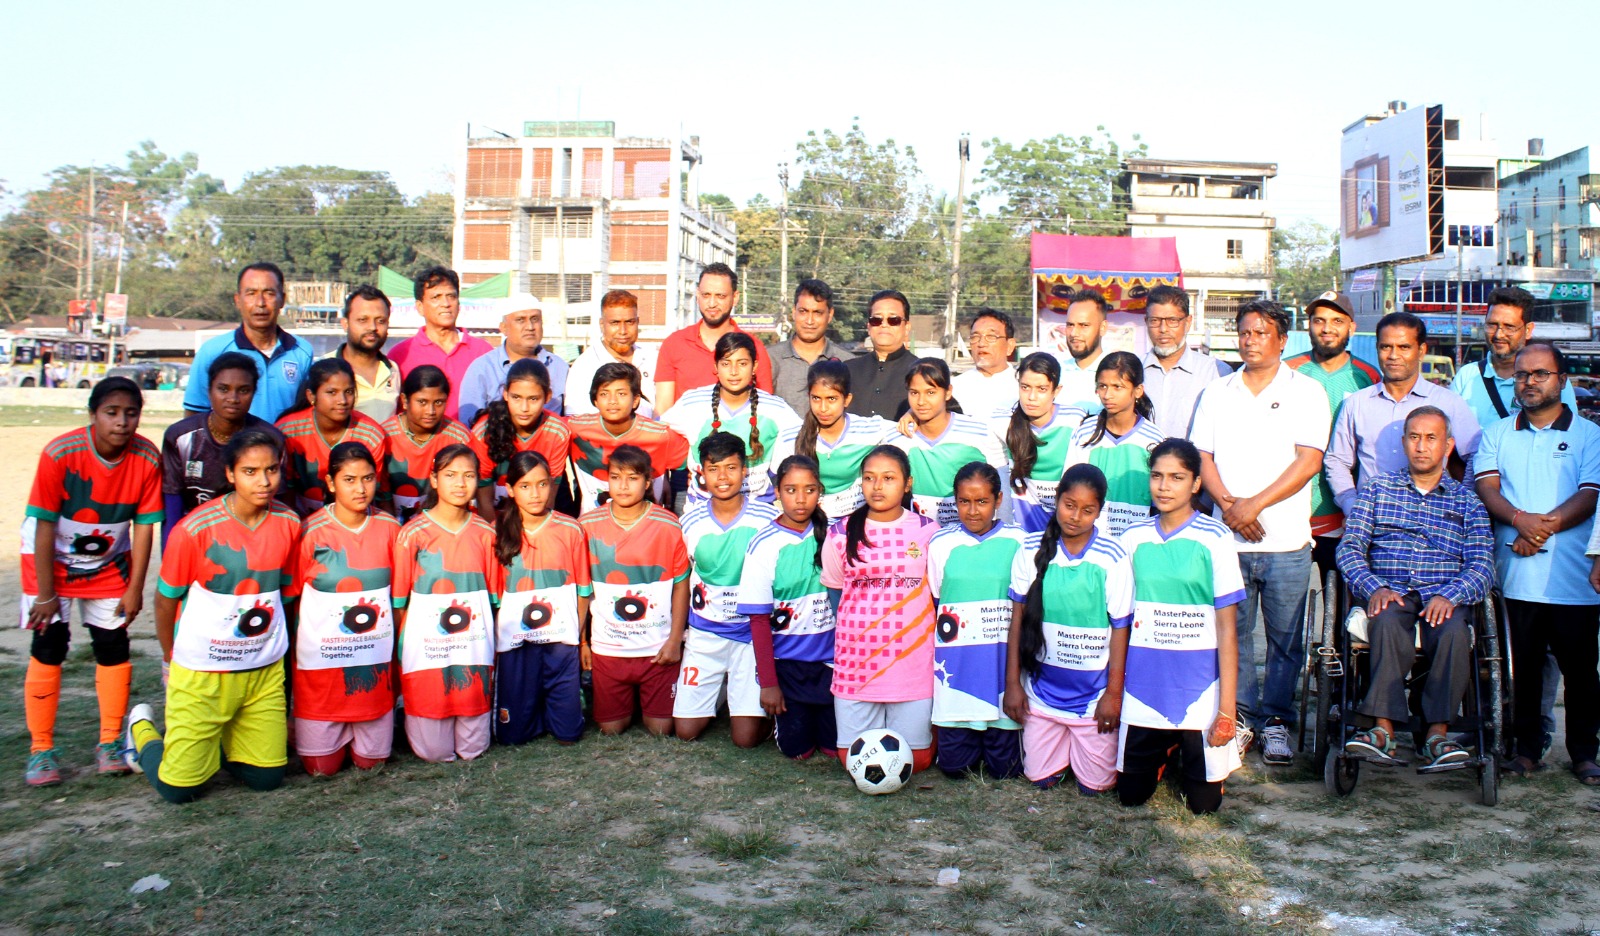 MasterPeace Bangladesh and MasterPeace Sierra Leone came together to celebrate International Women’s Day through Sports